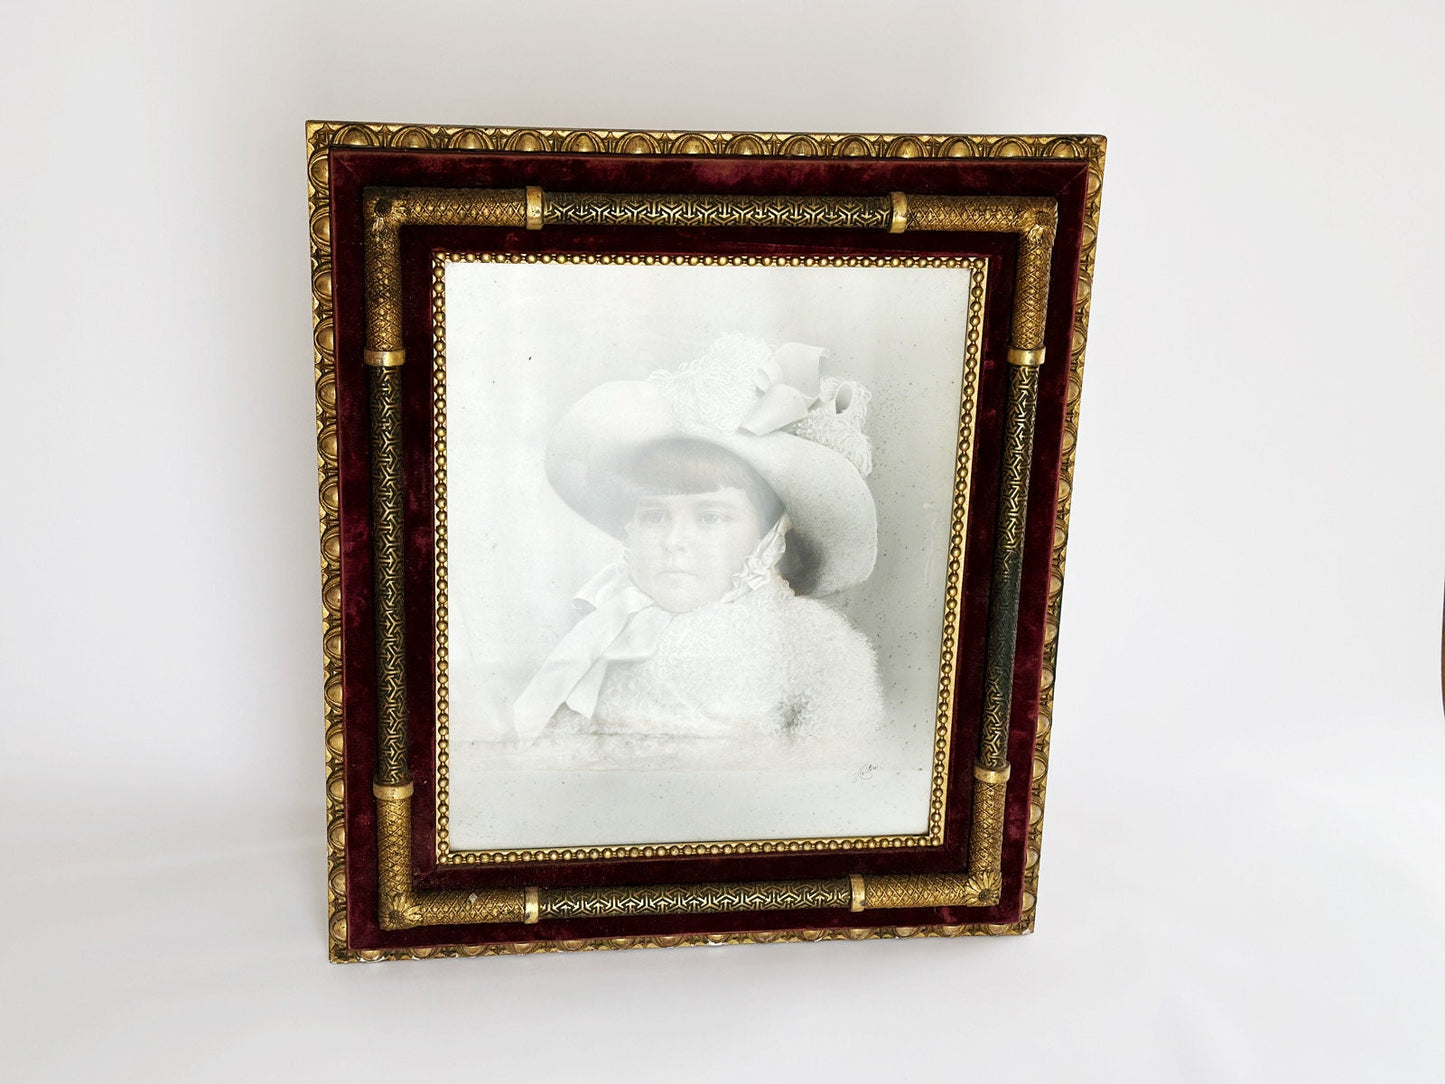 A full look at the large antique Victorian frame. This is a blend of the eras, likely late Art Nouveau and early Art Deco given the patterns and design features of the frame. The frame still holds the original portrait of a young child.